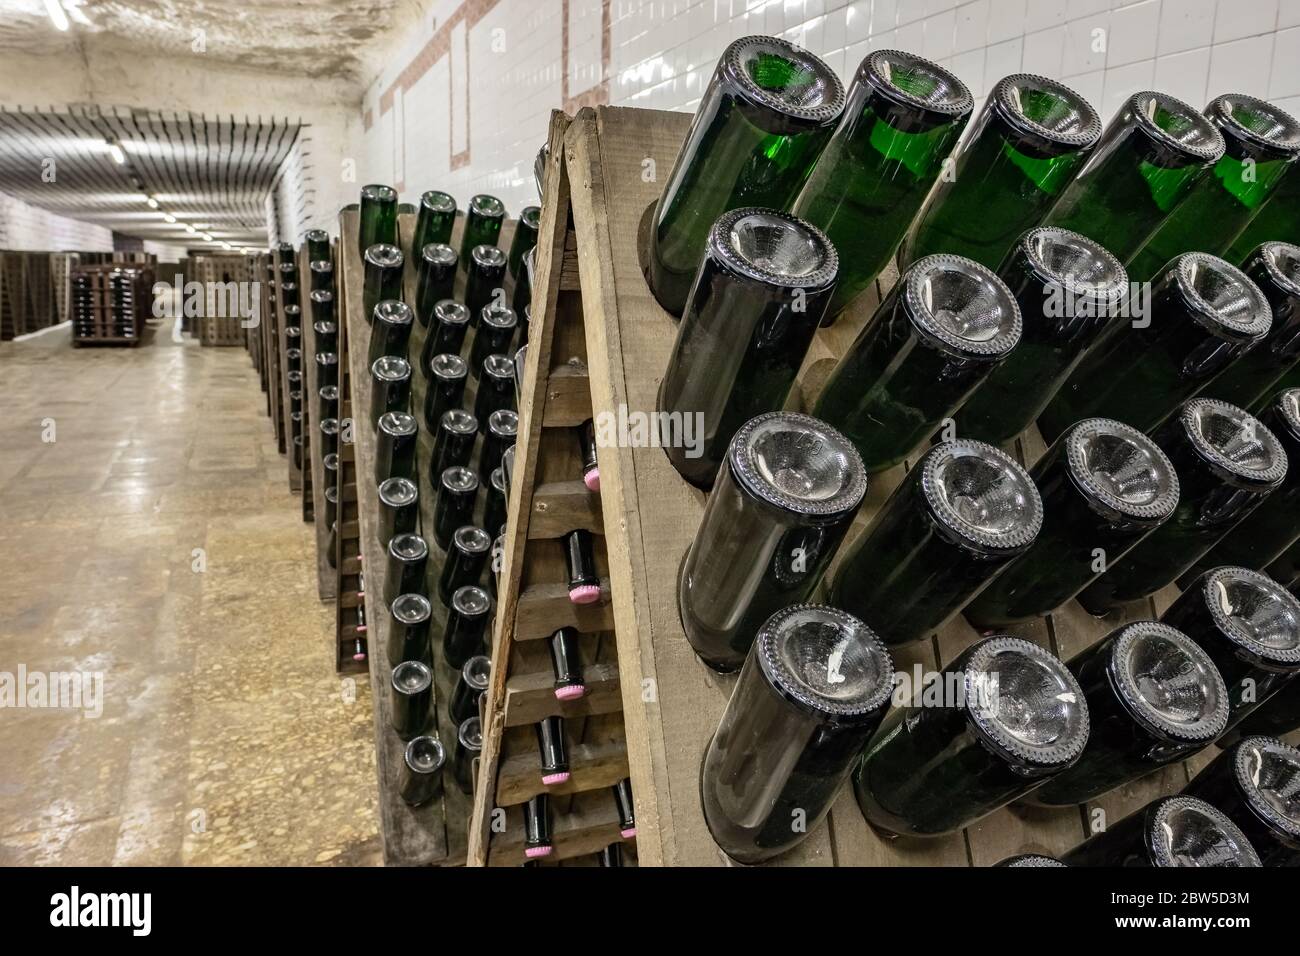 Sparkling wine bottles stacked up in old wine cellar close-up background. Stock Photo